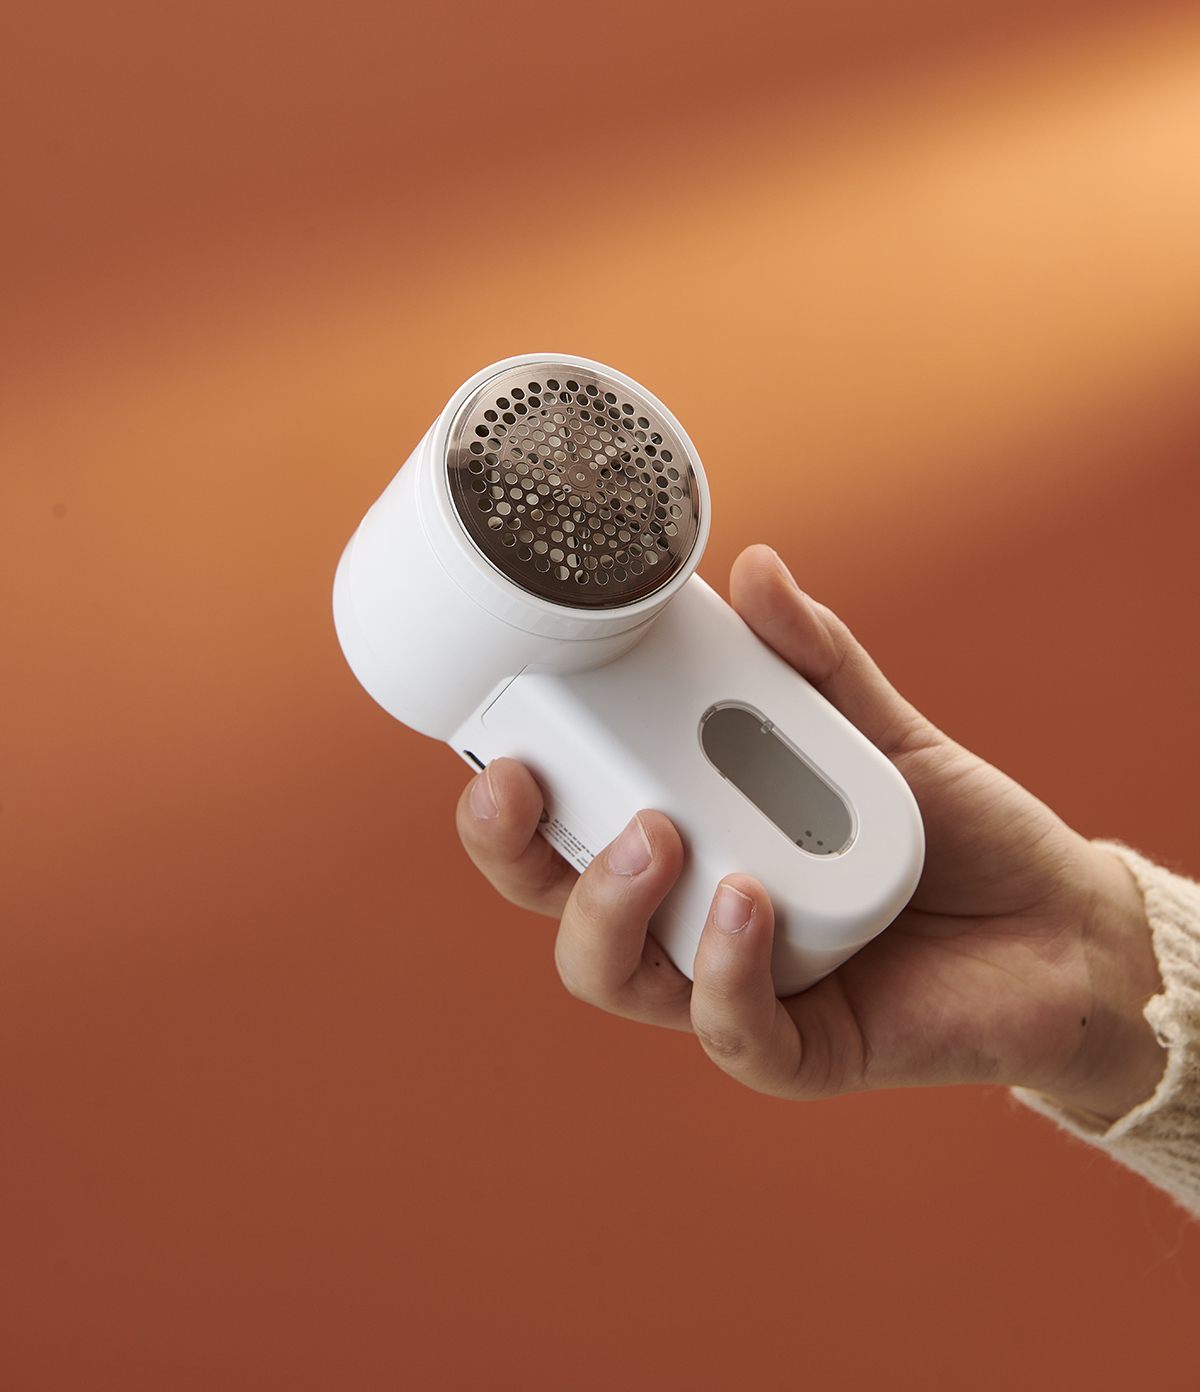 Electric Clothing Lint Remover – Shopatease